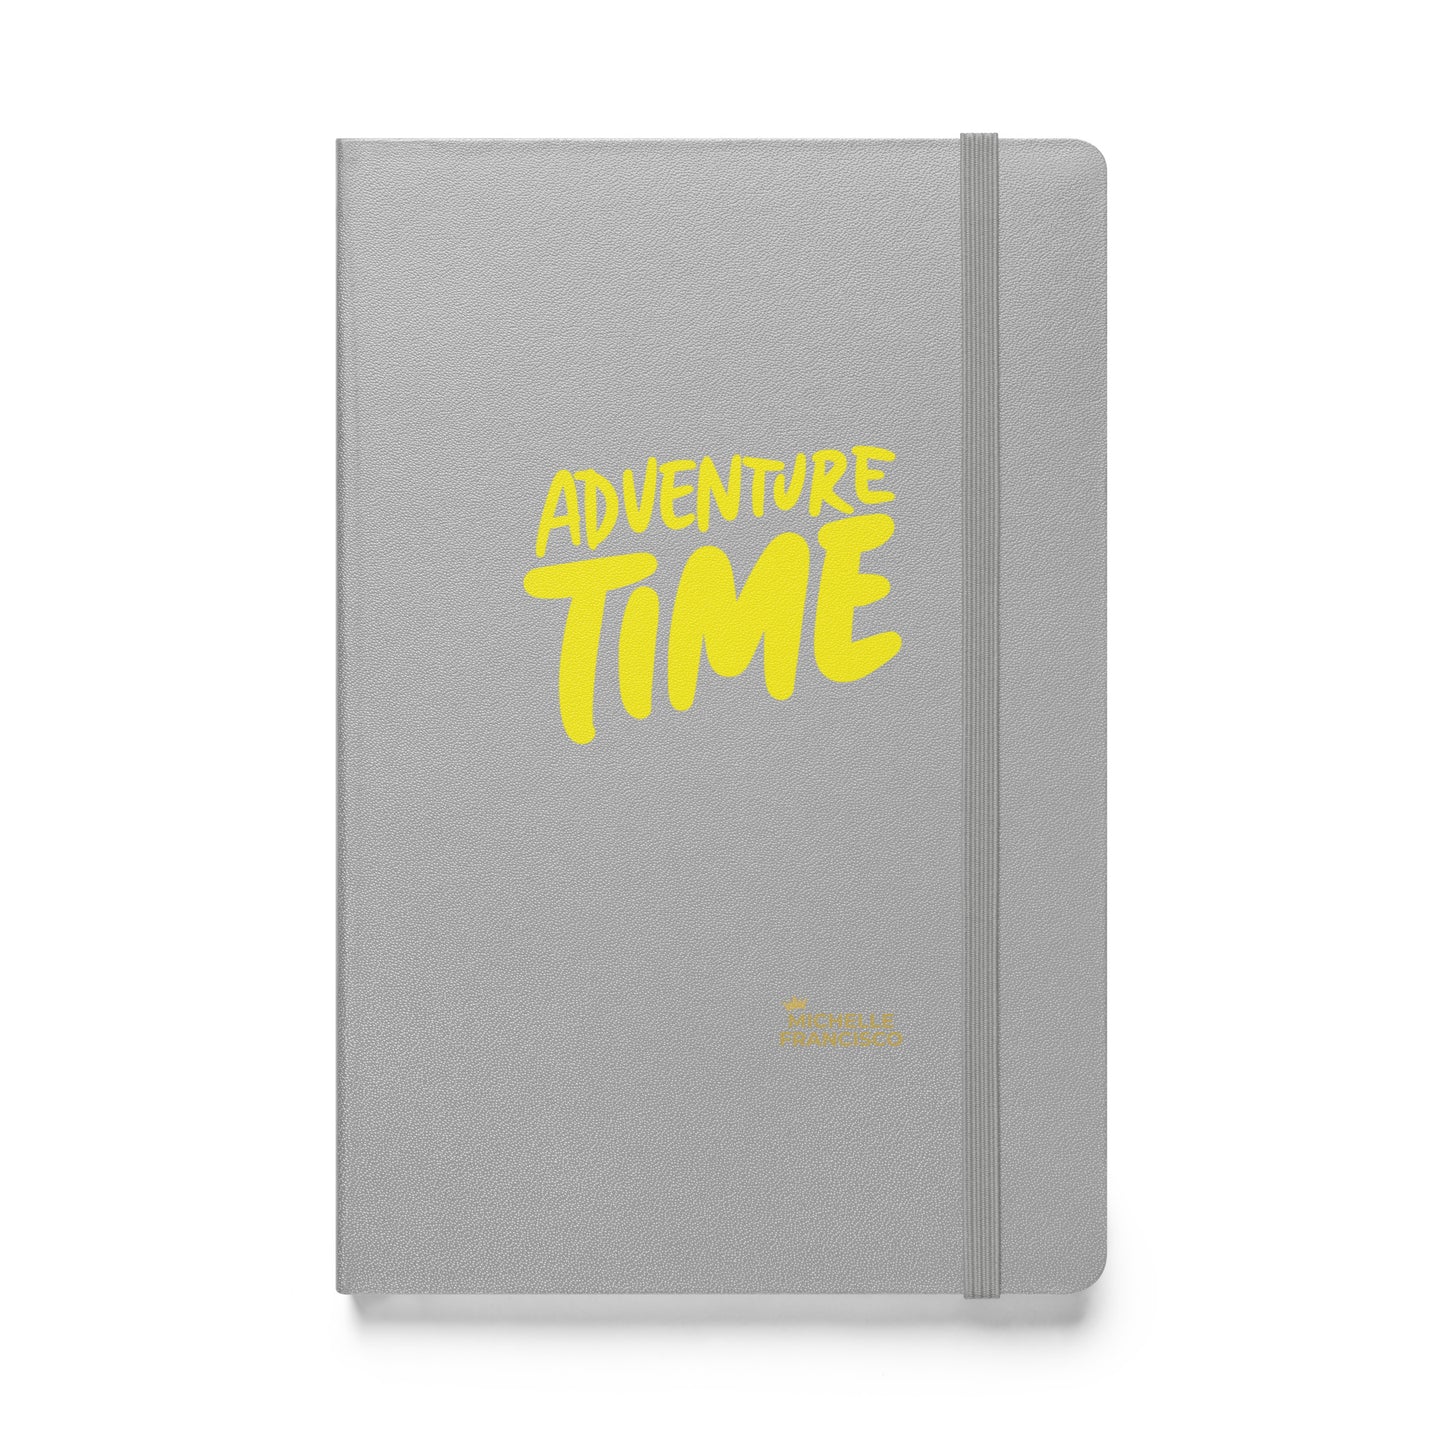 Adventure Time Hardcover Bound Notebook